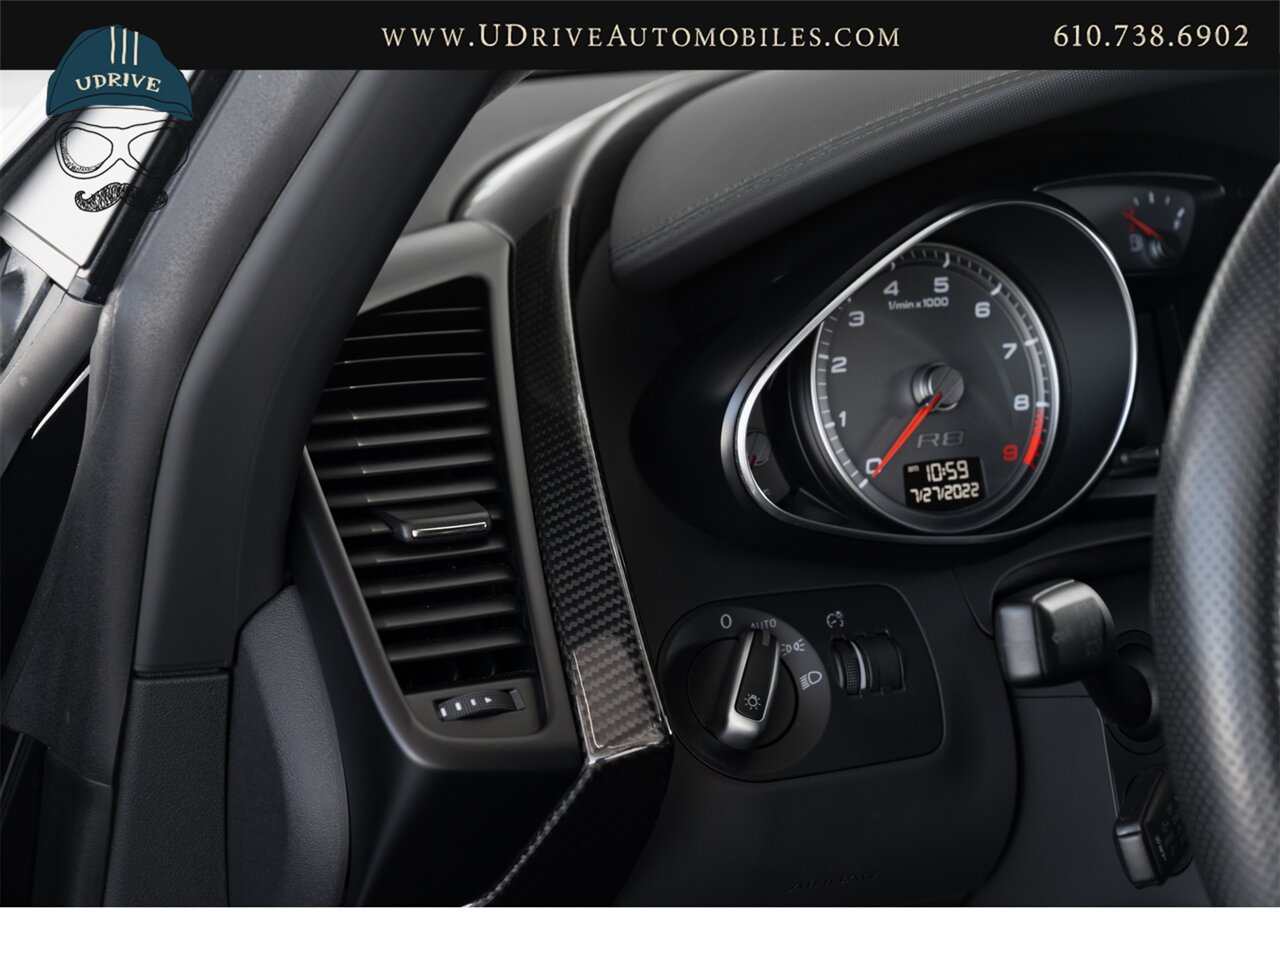 2012 Audi R8 4.2 Quattro  6 Speed Manual 1 Owner Service History - Photo 33 - West Chester, PA 19382